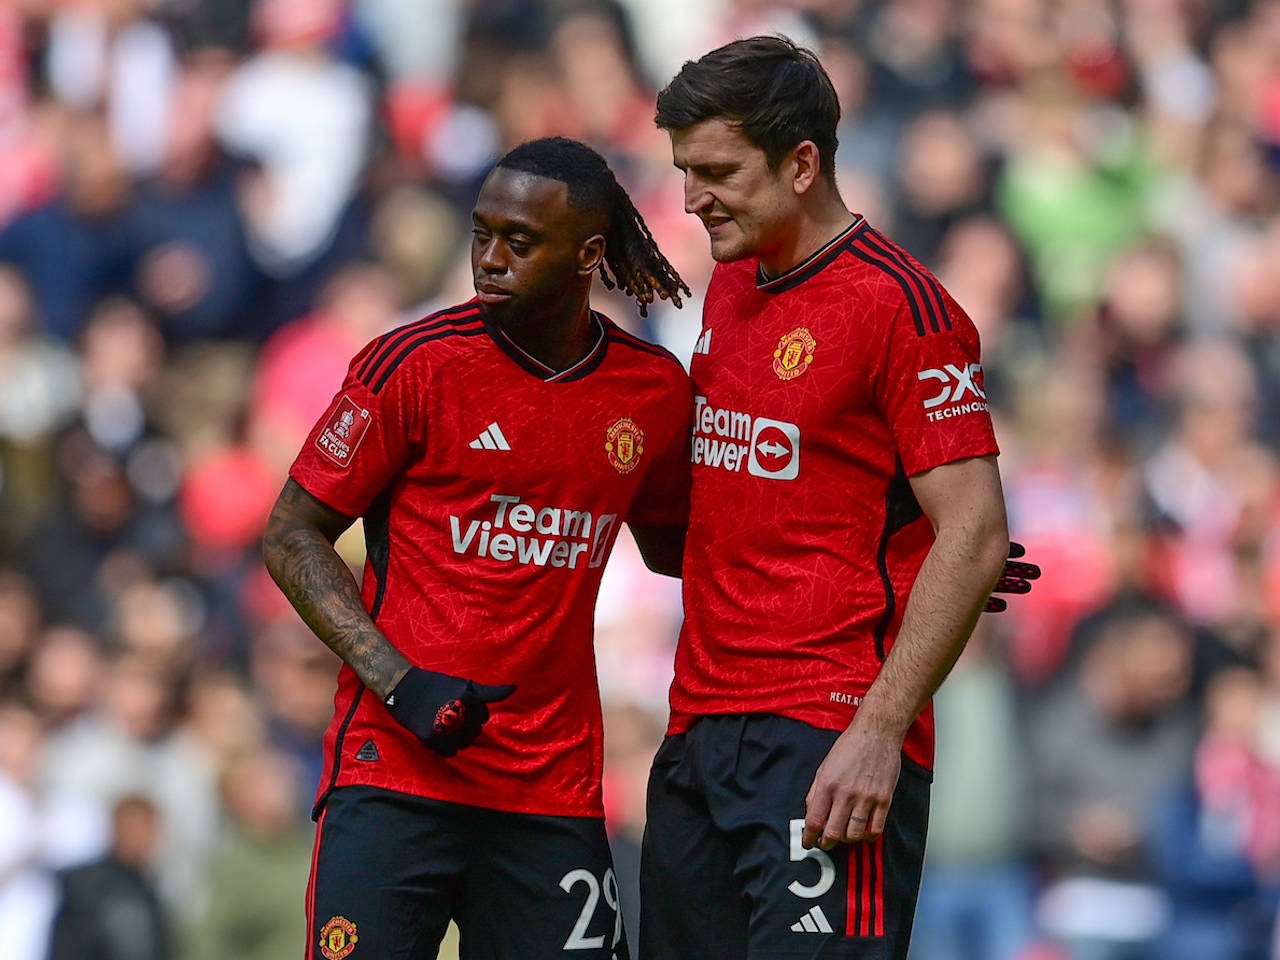 Man United defender's exit 'at risk of collapse' over wage demands